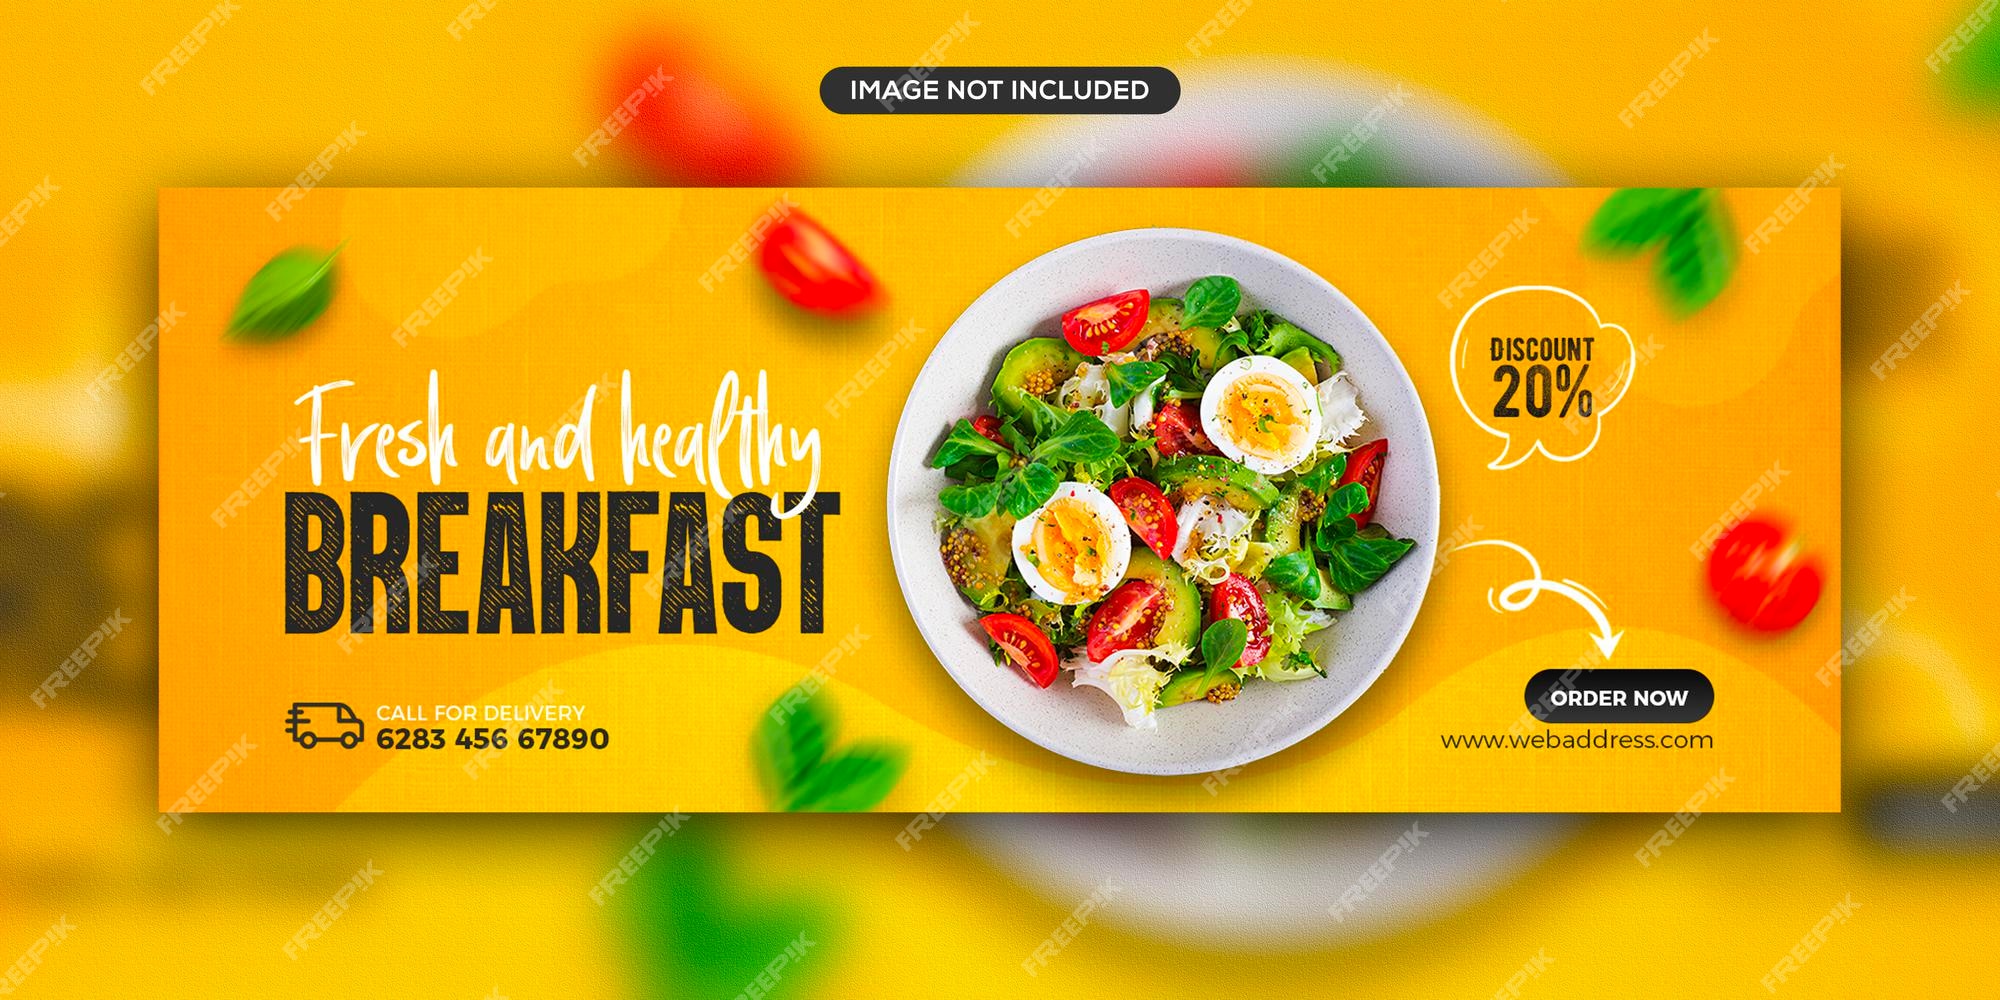 Page 28 | Organic food banner Images | Free Vectors, Stock Photos & PSD